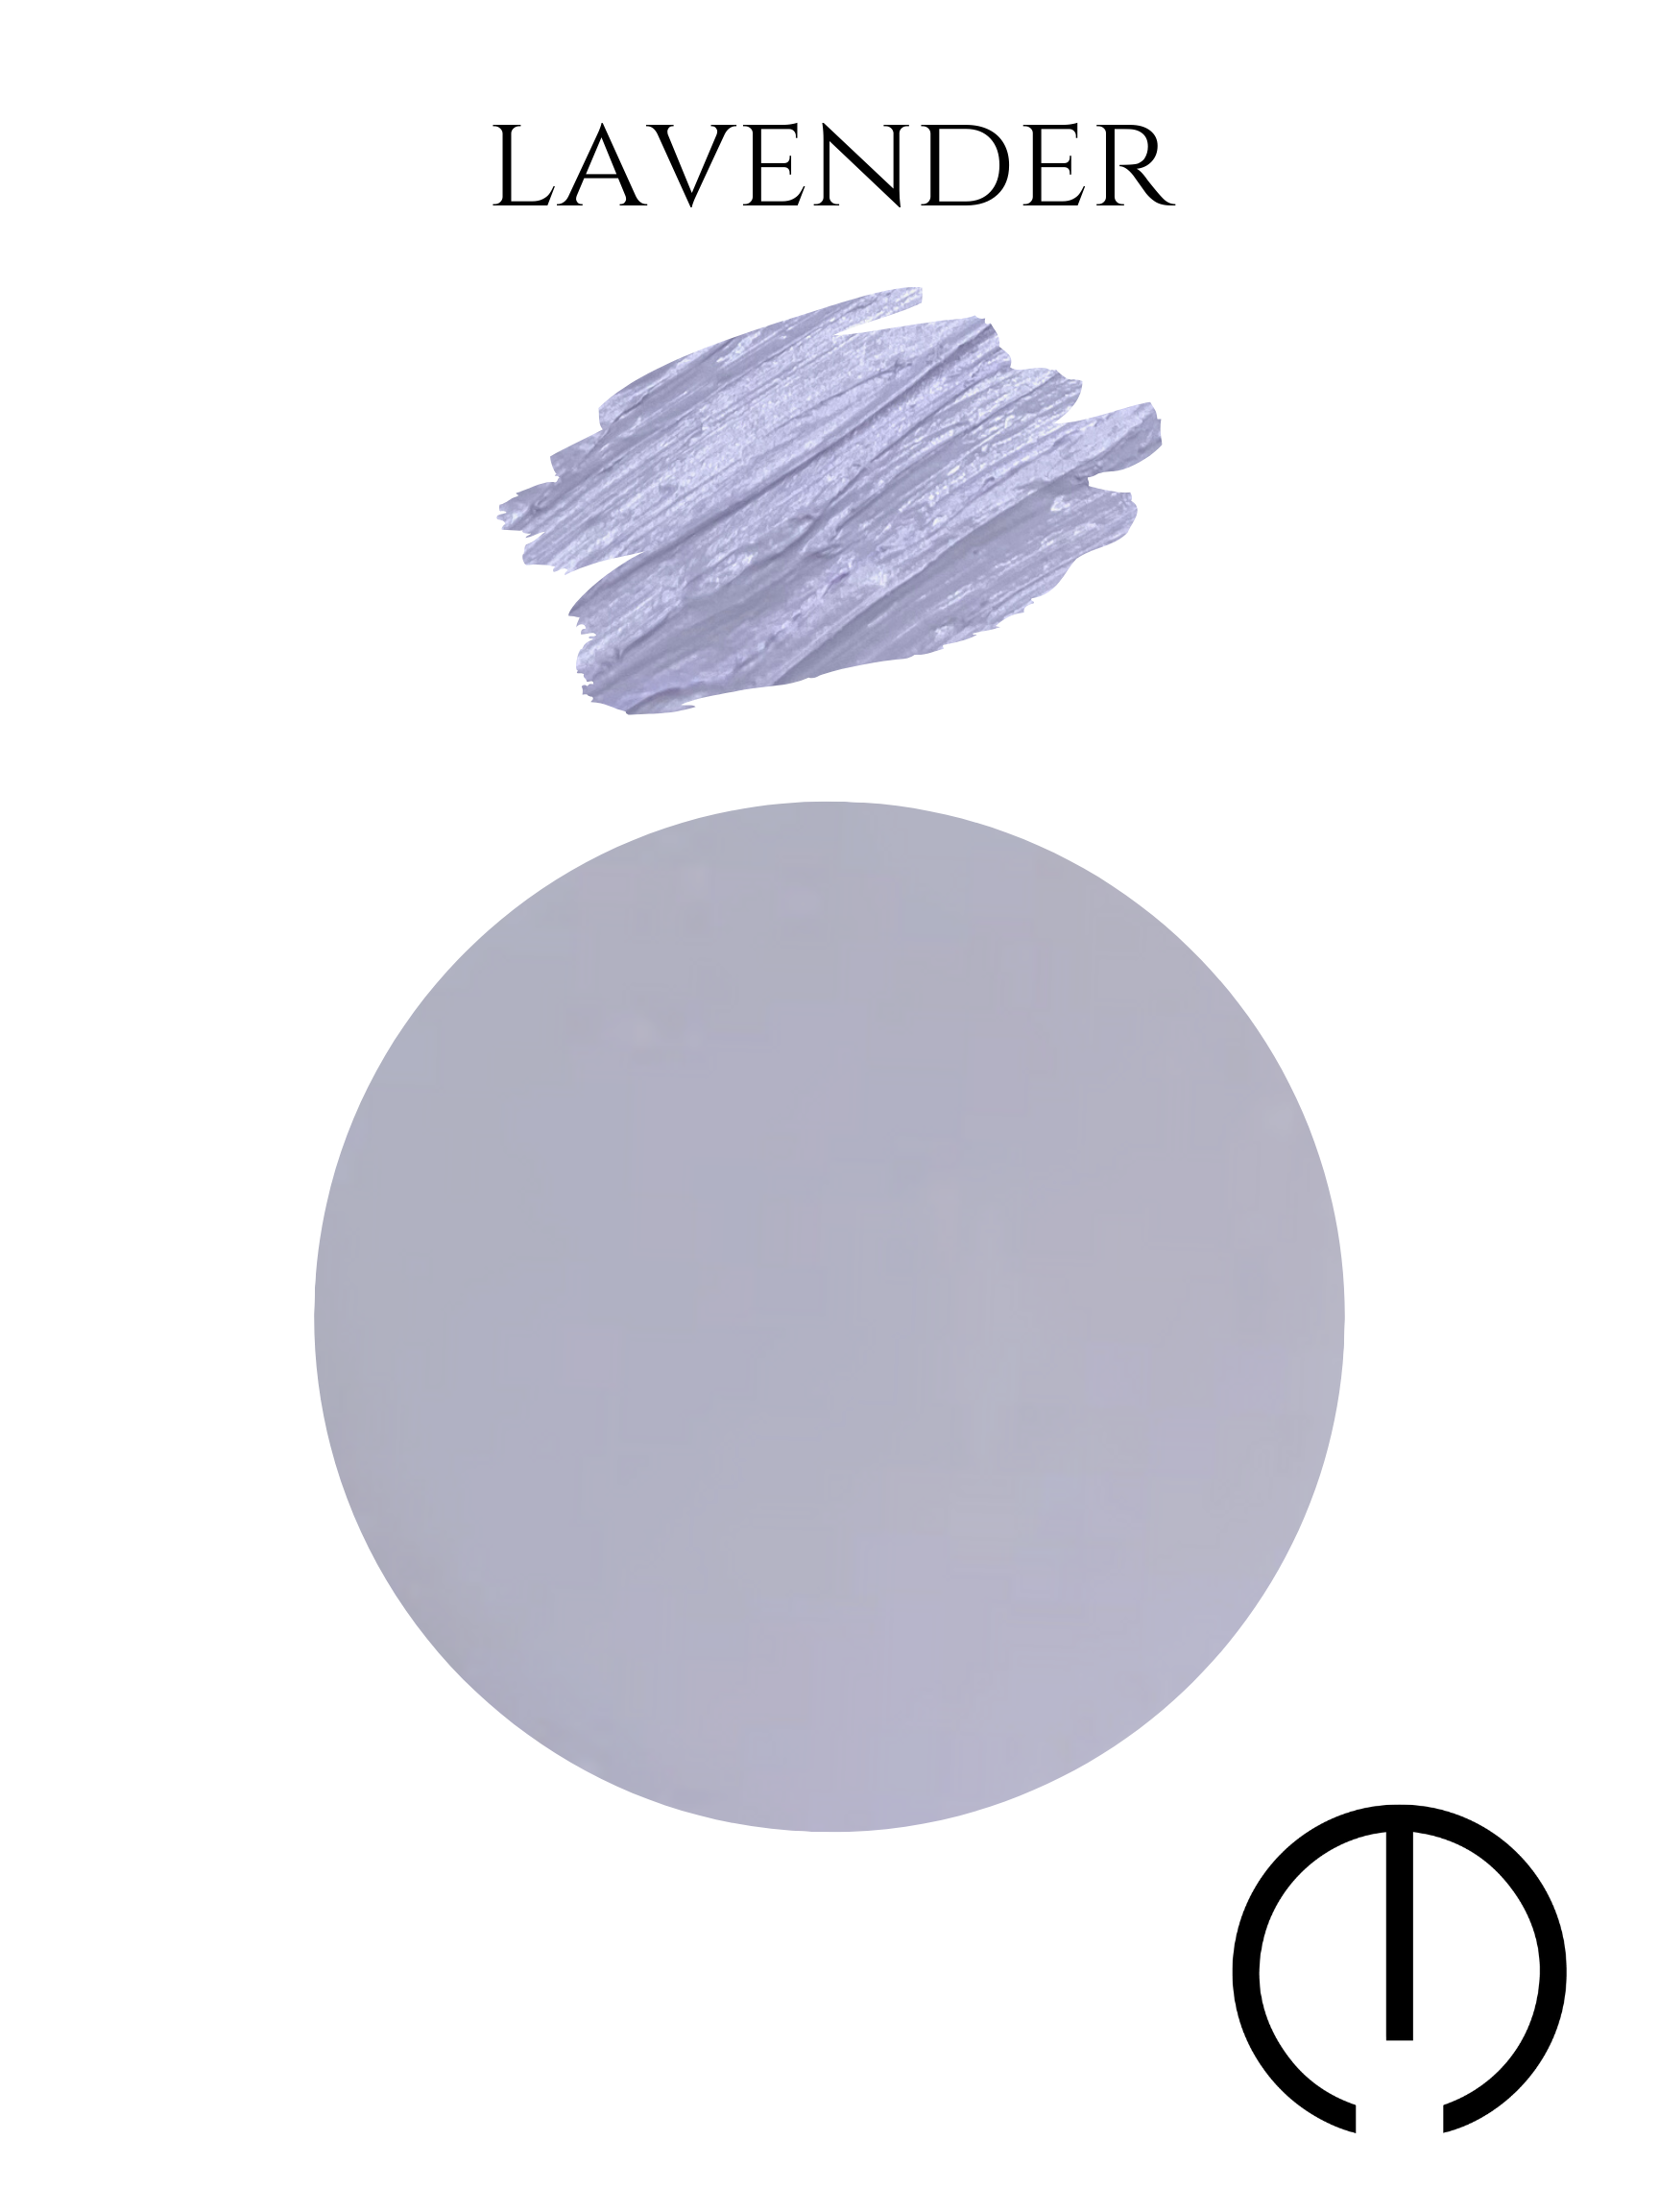 Corrector - Multiple Colors Available - Makeupology Store